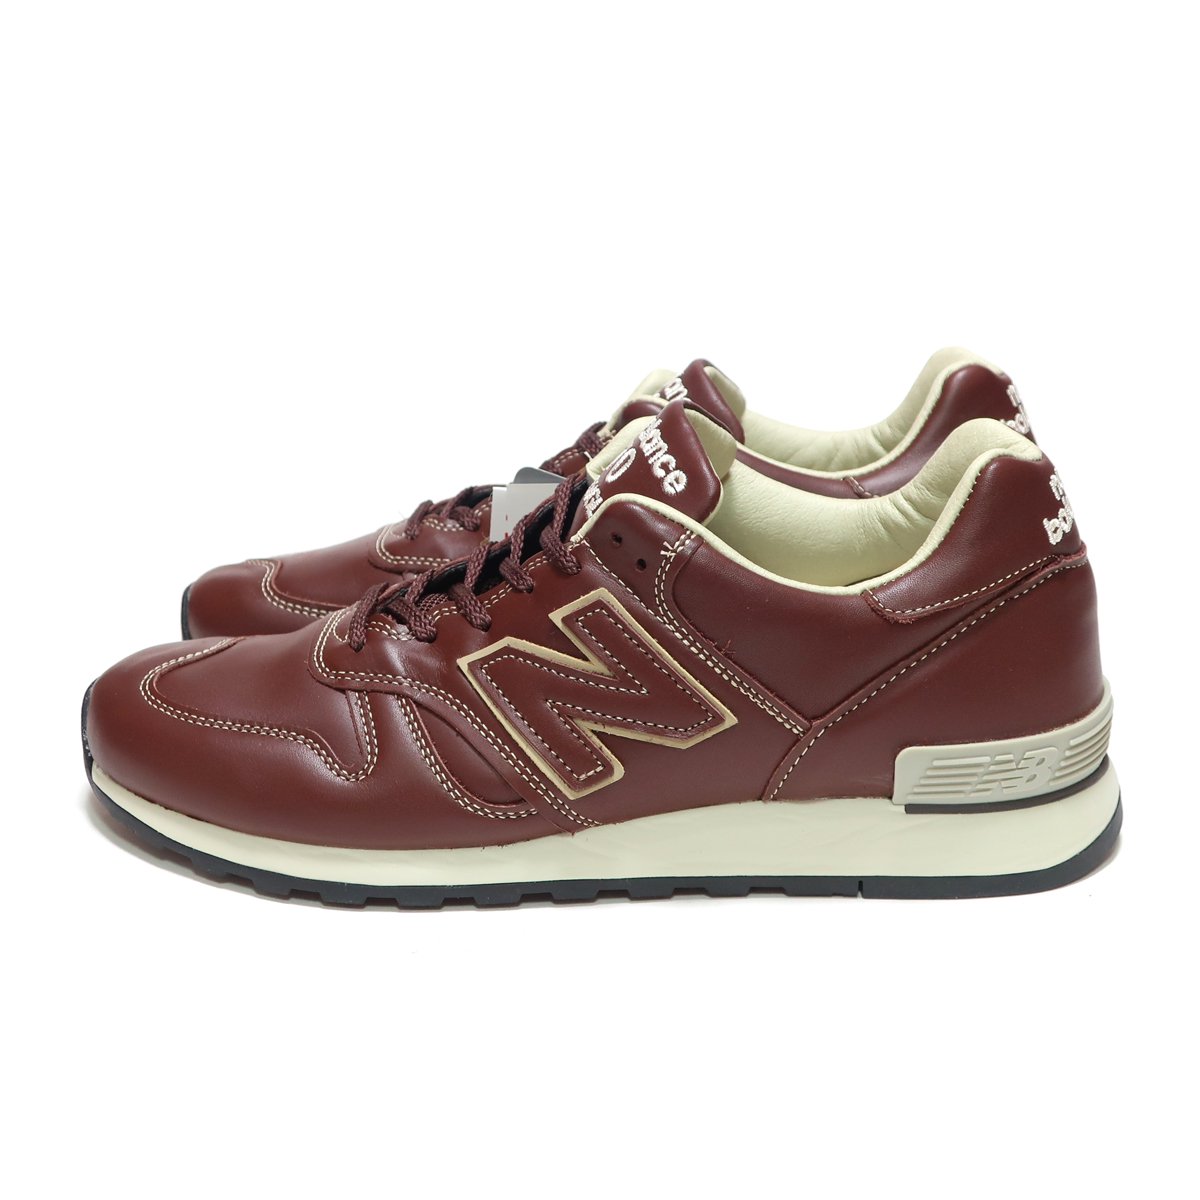 NEW BALANCE M670BRN BROWN LEATHER MADE IN ENGLAND ( ニューバランス